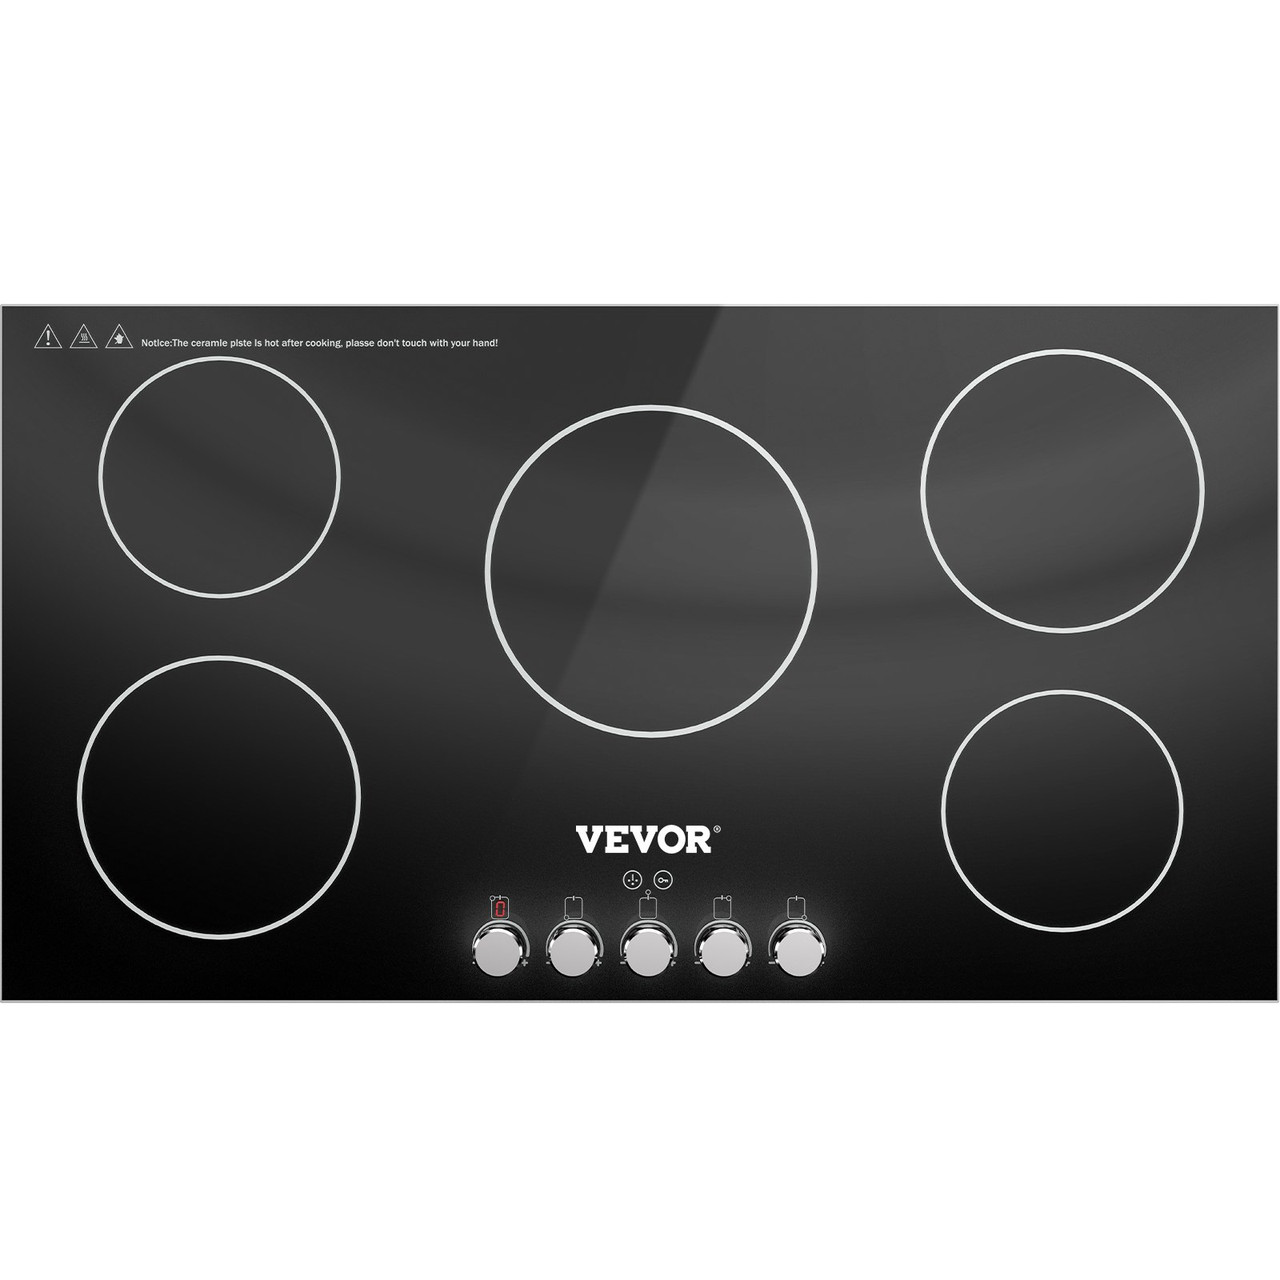 VEVOR Built-In Induction Cooktop 35 inch 5 Burners 220V Ceramic Glass Electric Stove Top with Knob Control Timer & Child Lock Included 9 Power